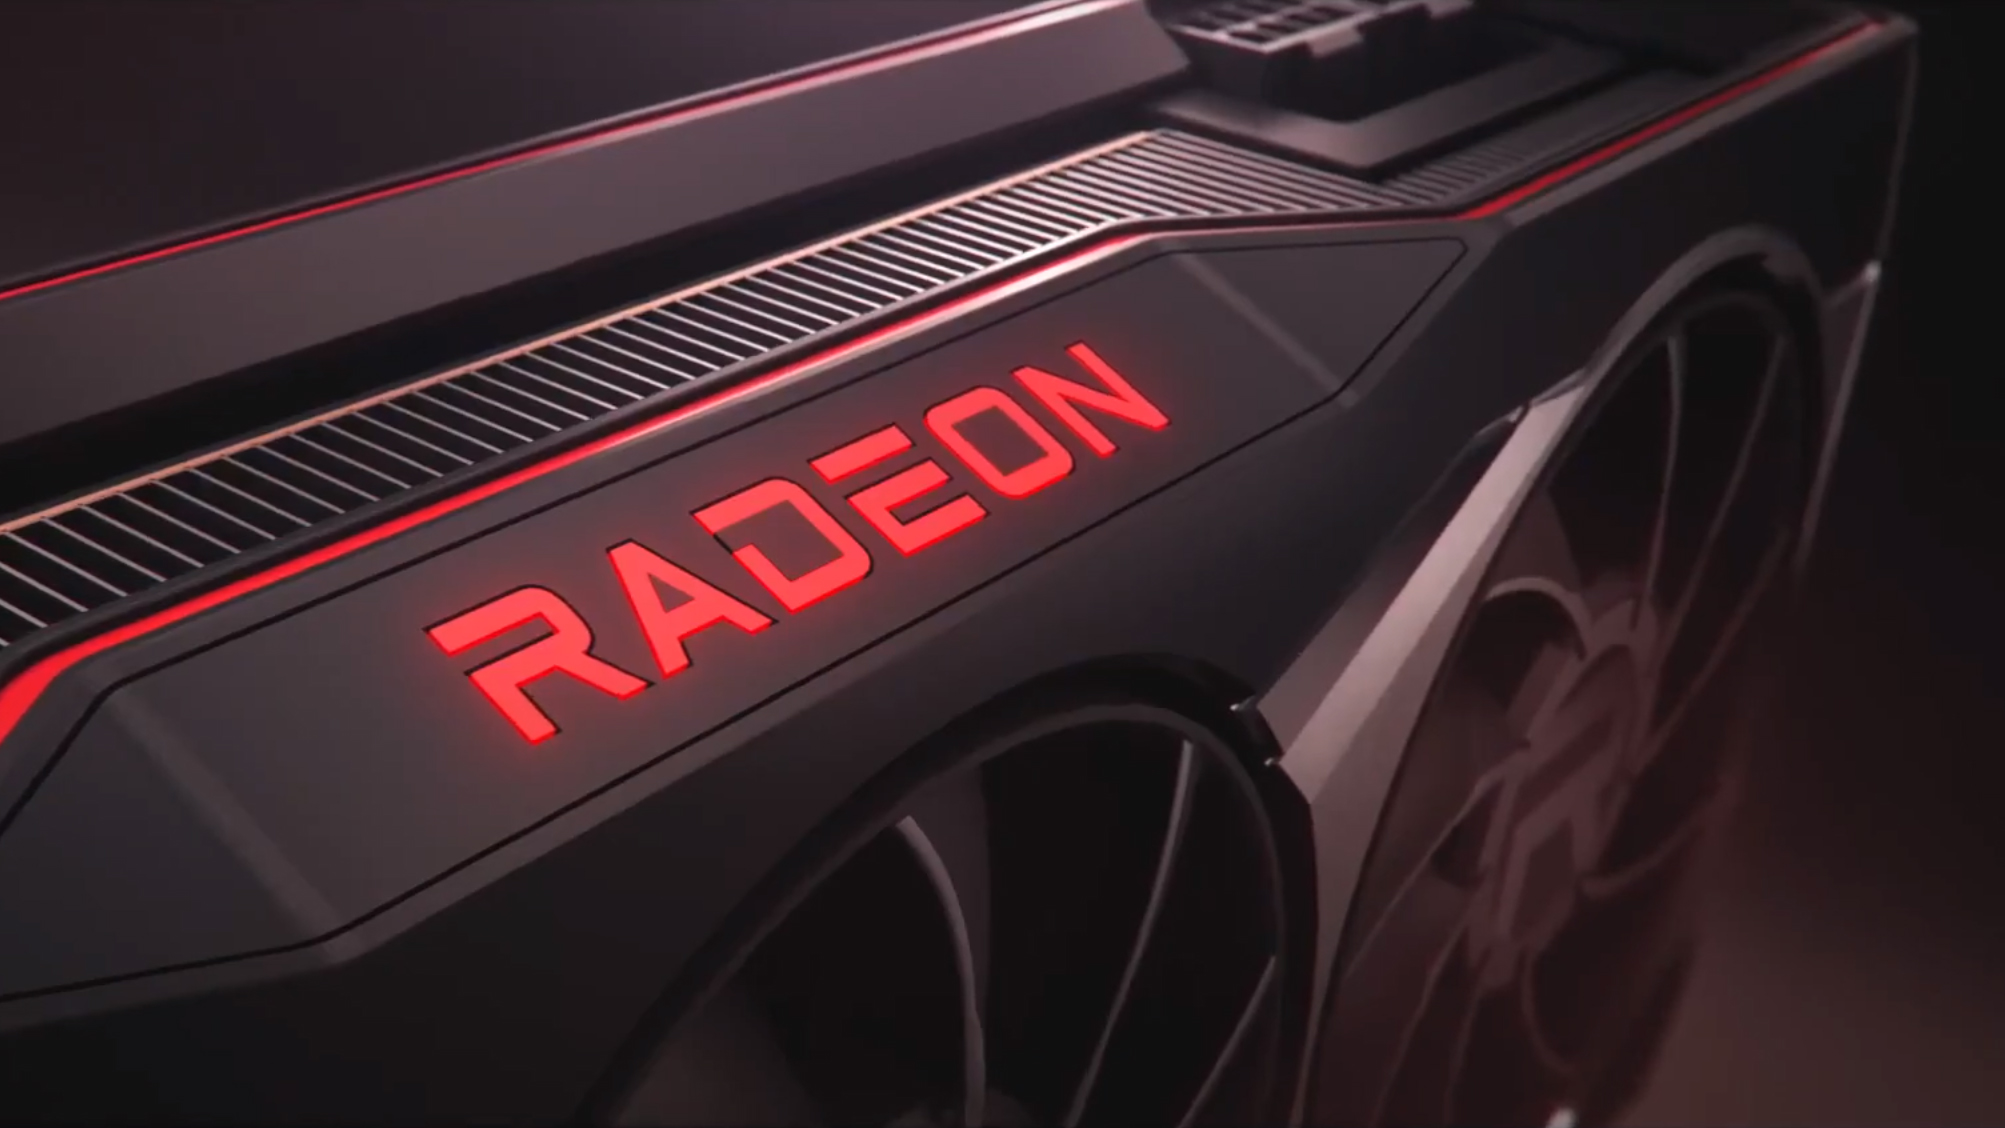 AMD’s RDNA 3 flagship GPU could be one step closer to launch